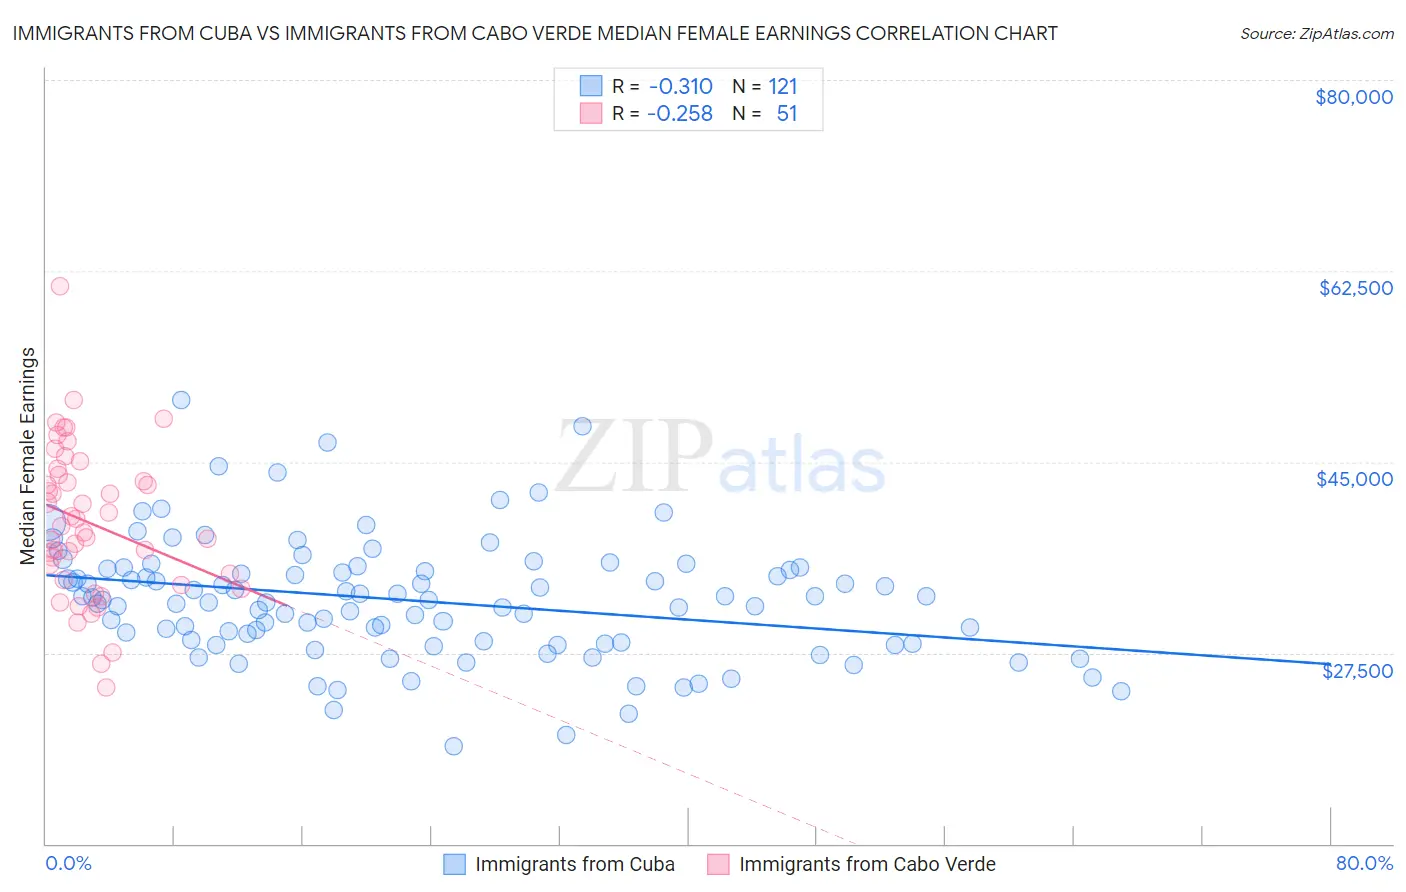 Immigrants from Cuba vs Immigrants from Cabo Verde Median Female Earnings